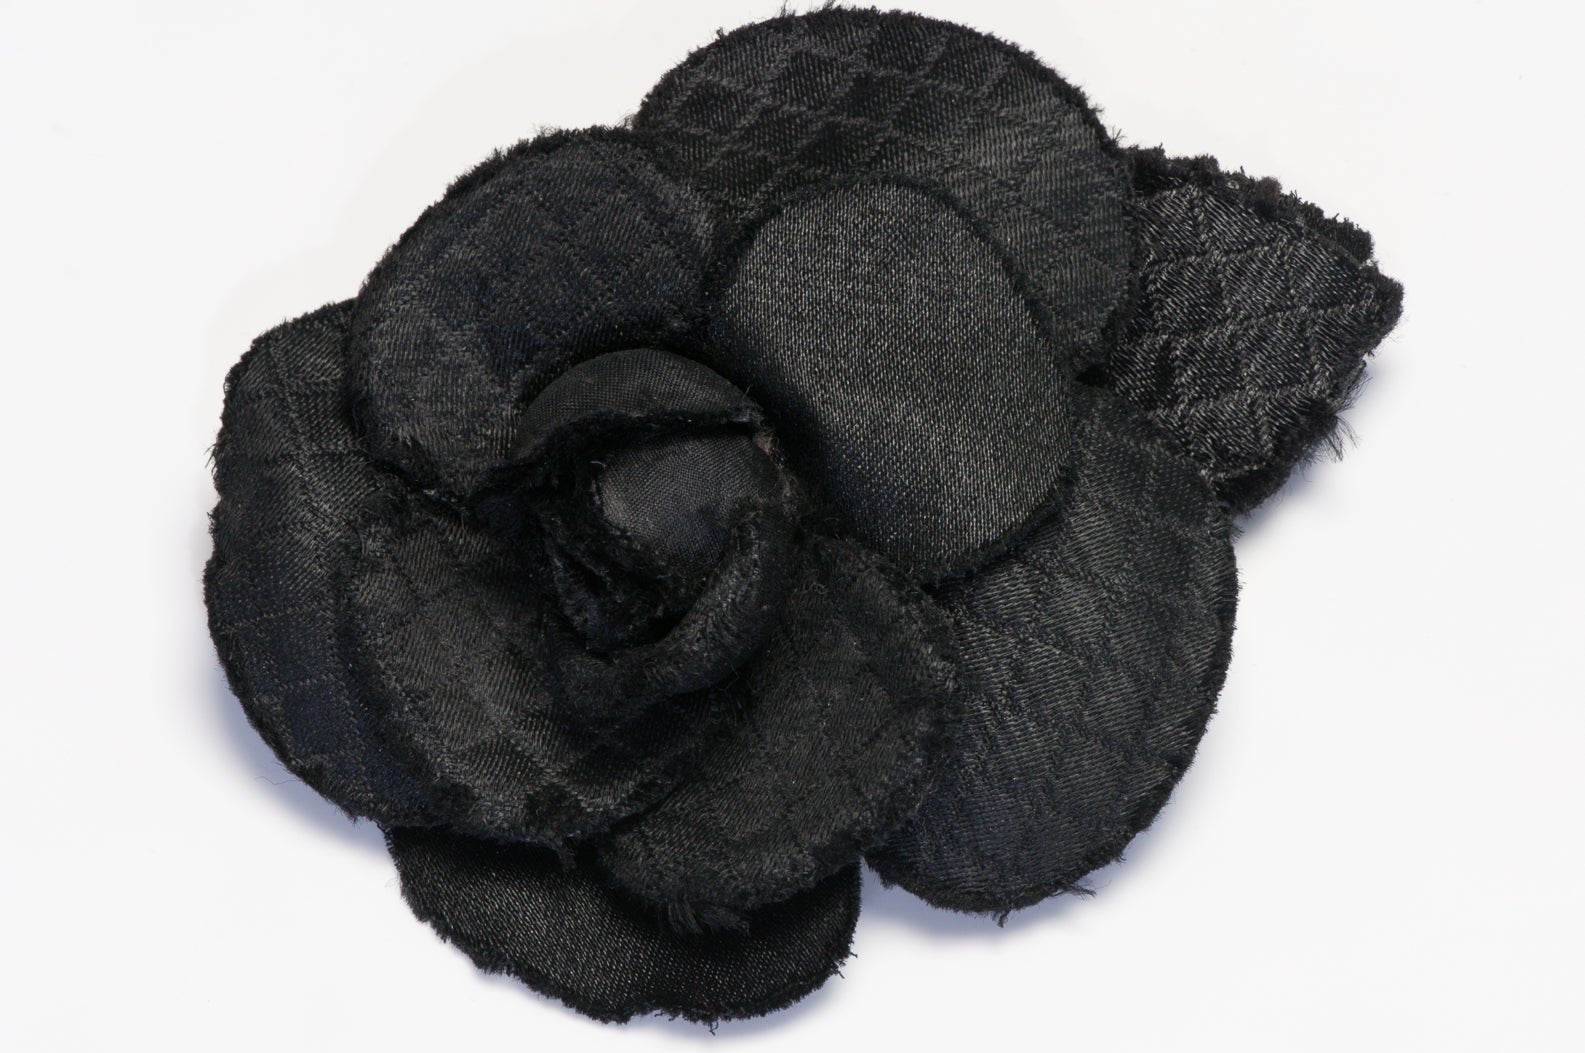 Vintage 1990’s Chanel Paris Black Quilted Fabric Camellia Flower Brooch